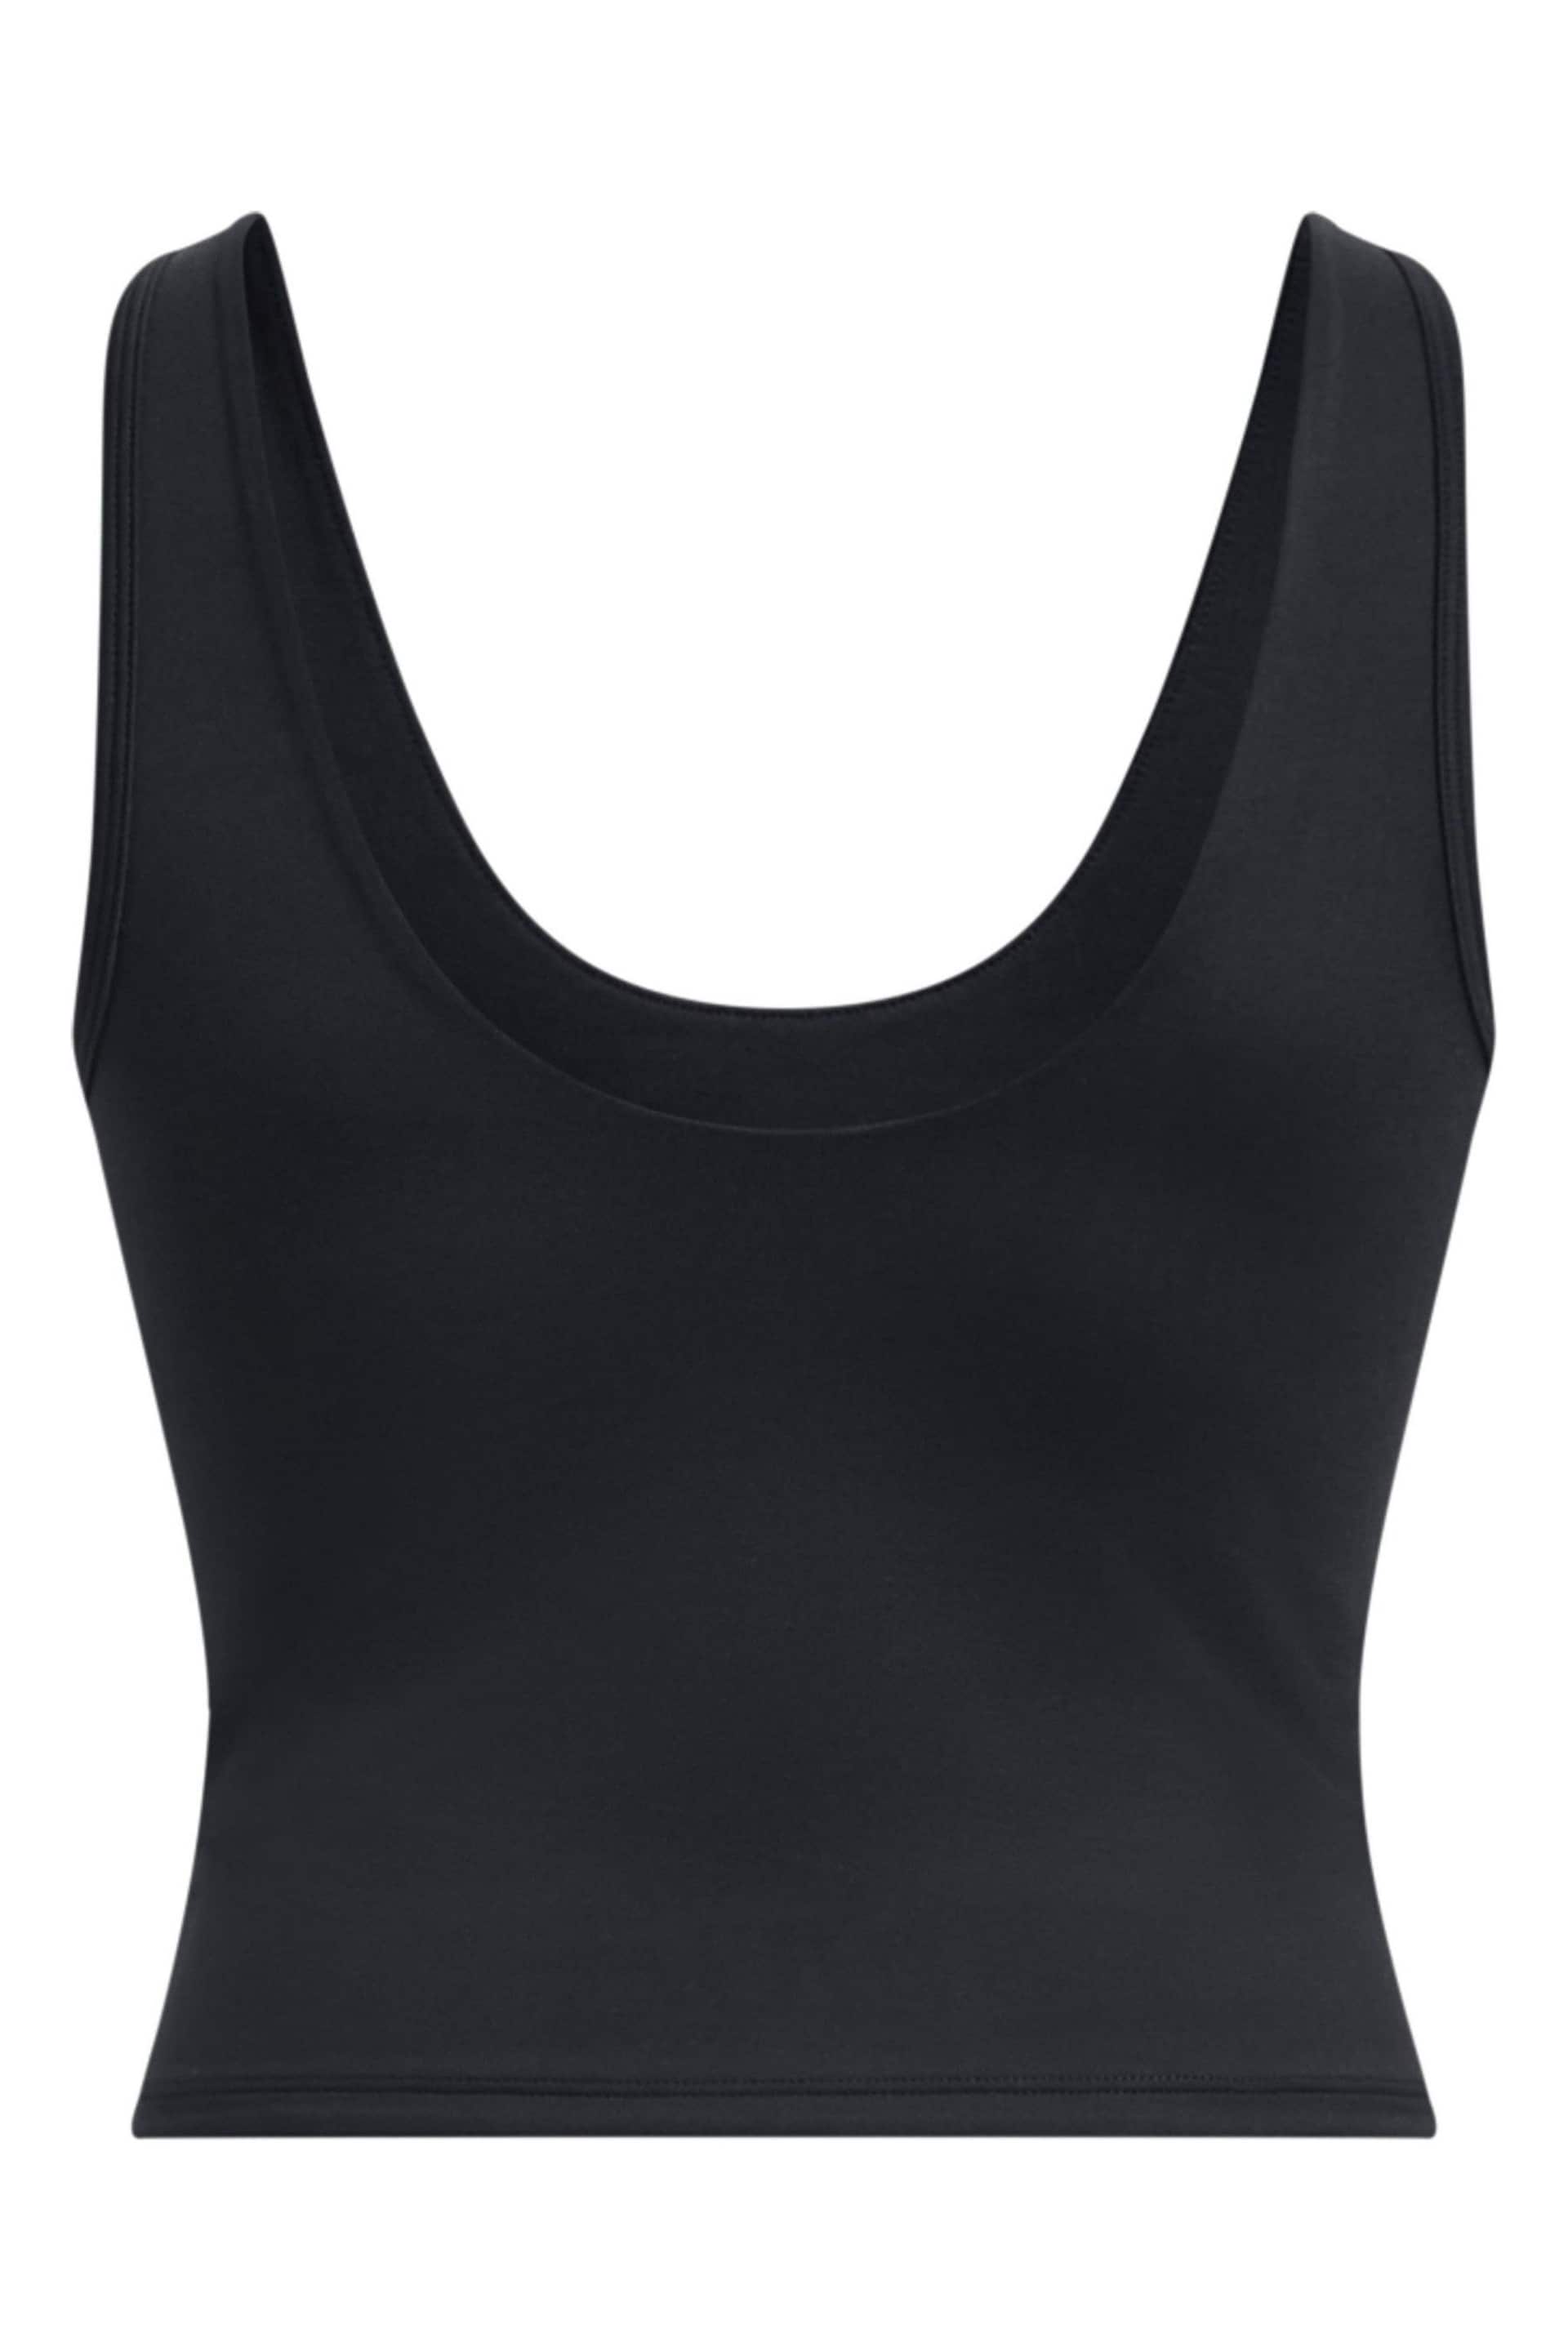 Under Armour Black Motion Crop Top - Image 5 of 6